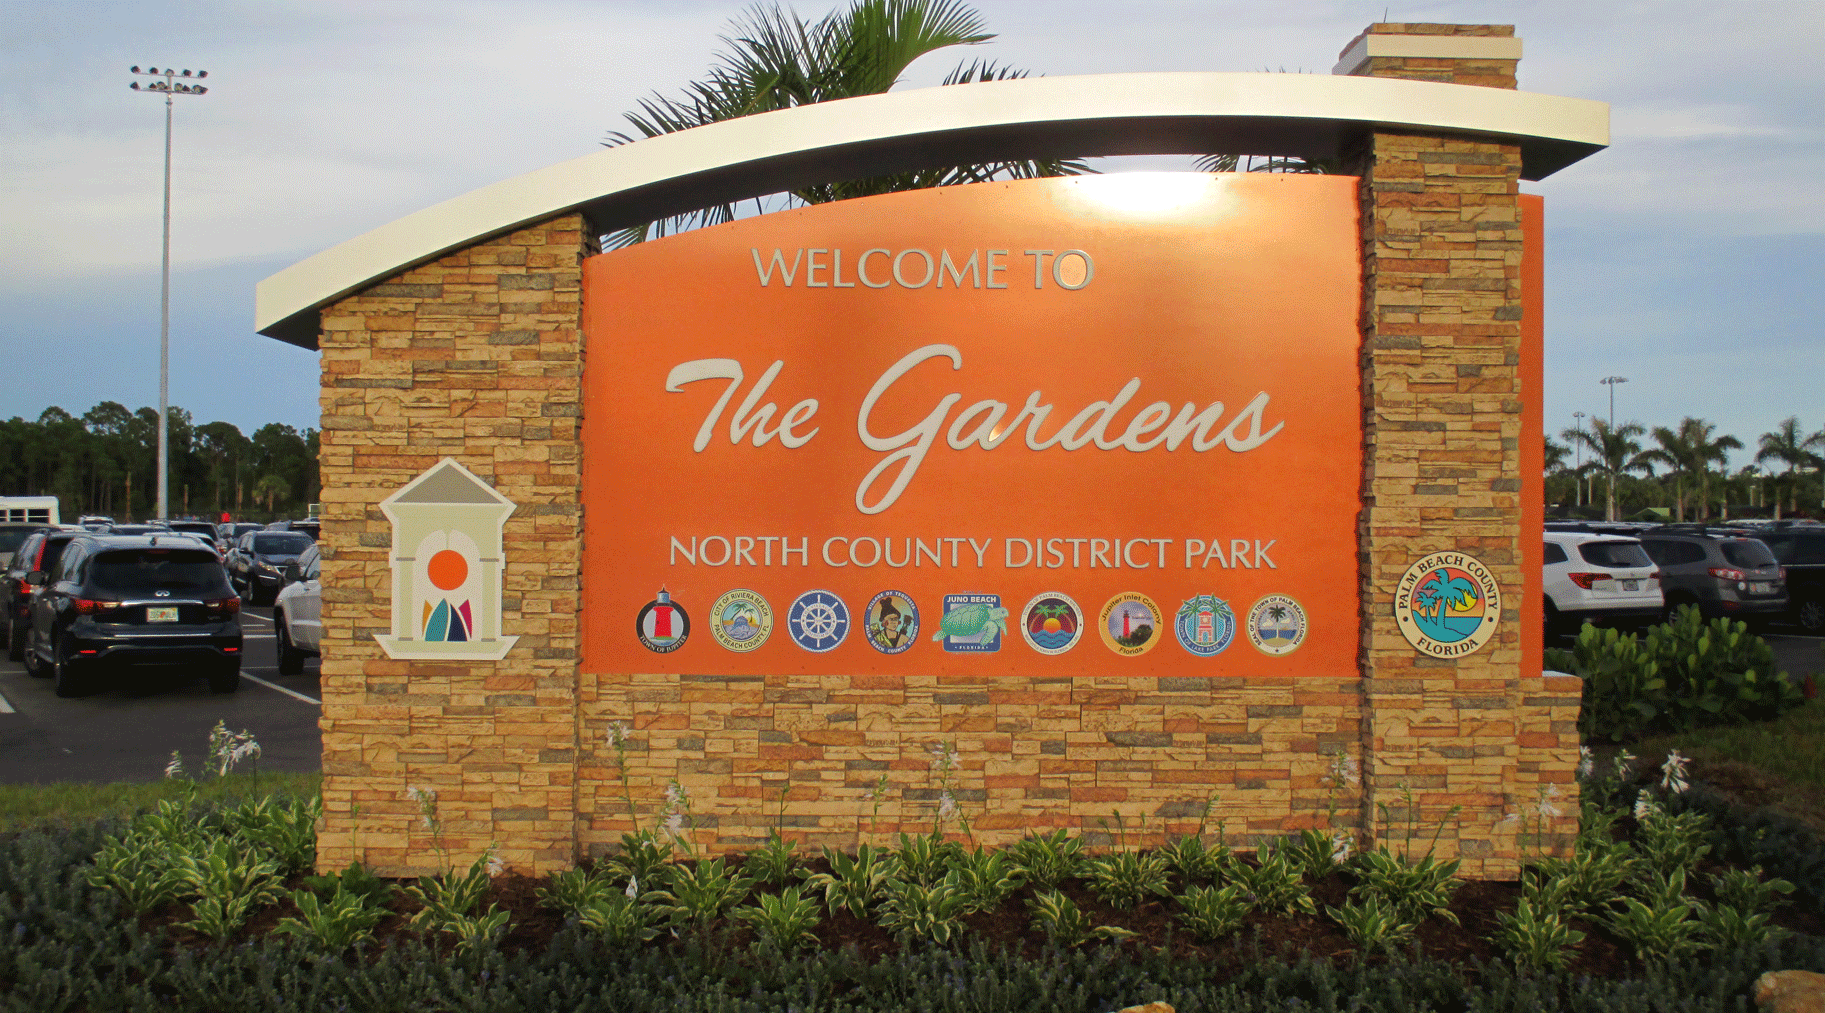 North county district park sign